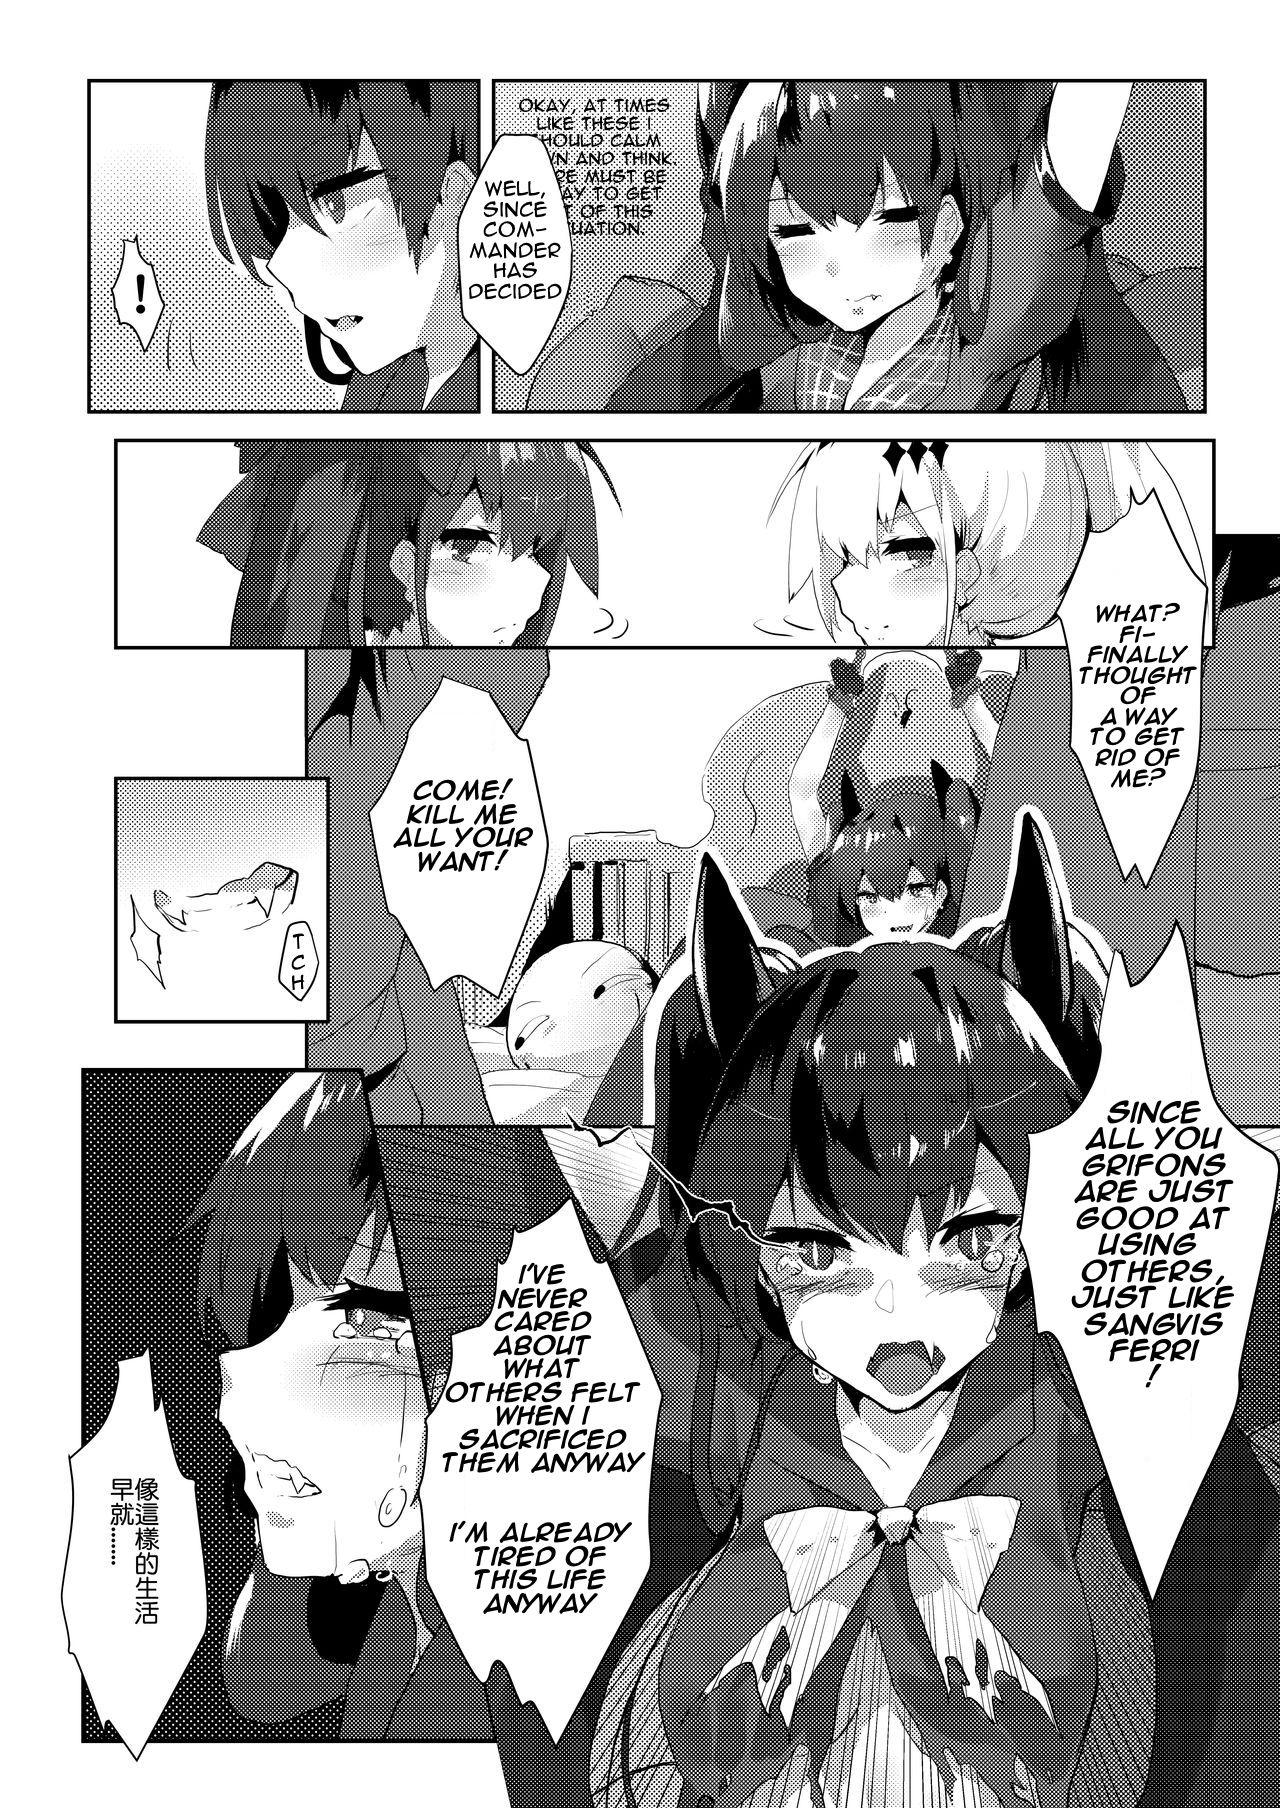 Hot Wife 鐵血人型擴編中 SF Dummy Linking - Girls frontline Gay College - Page 6